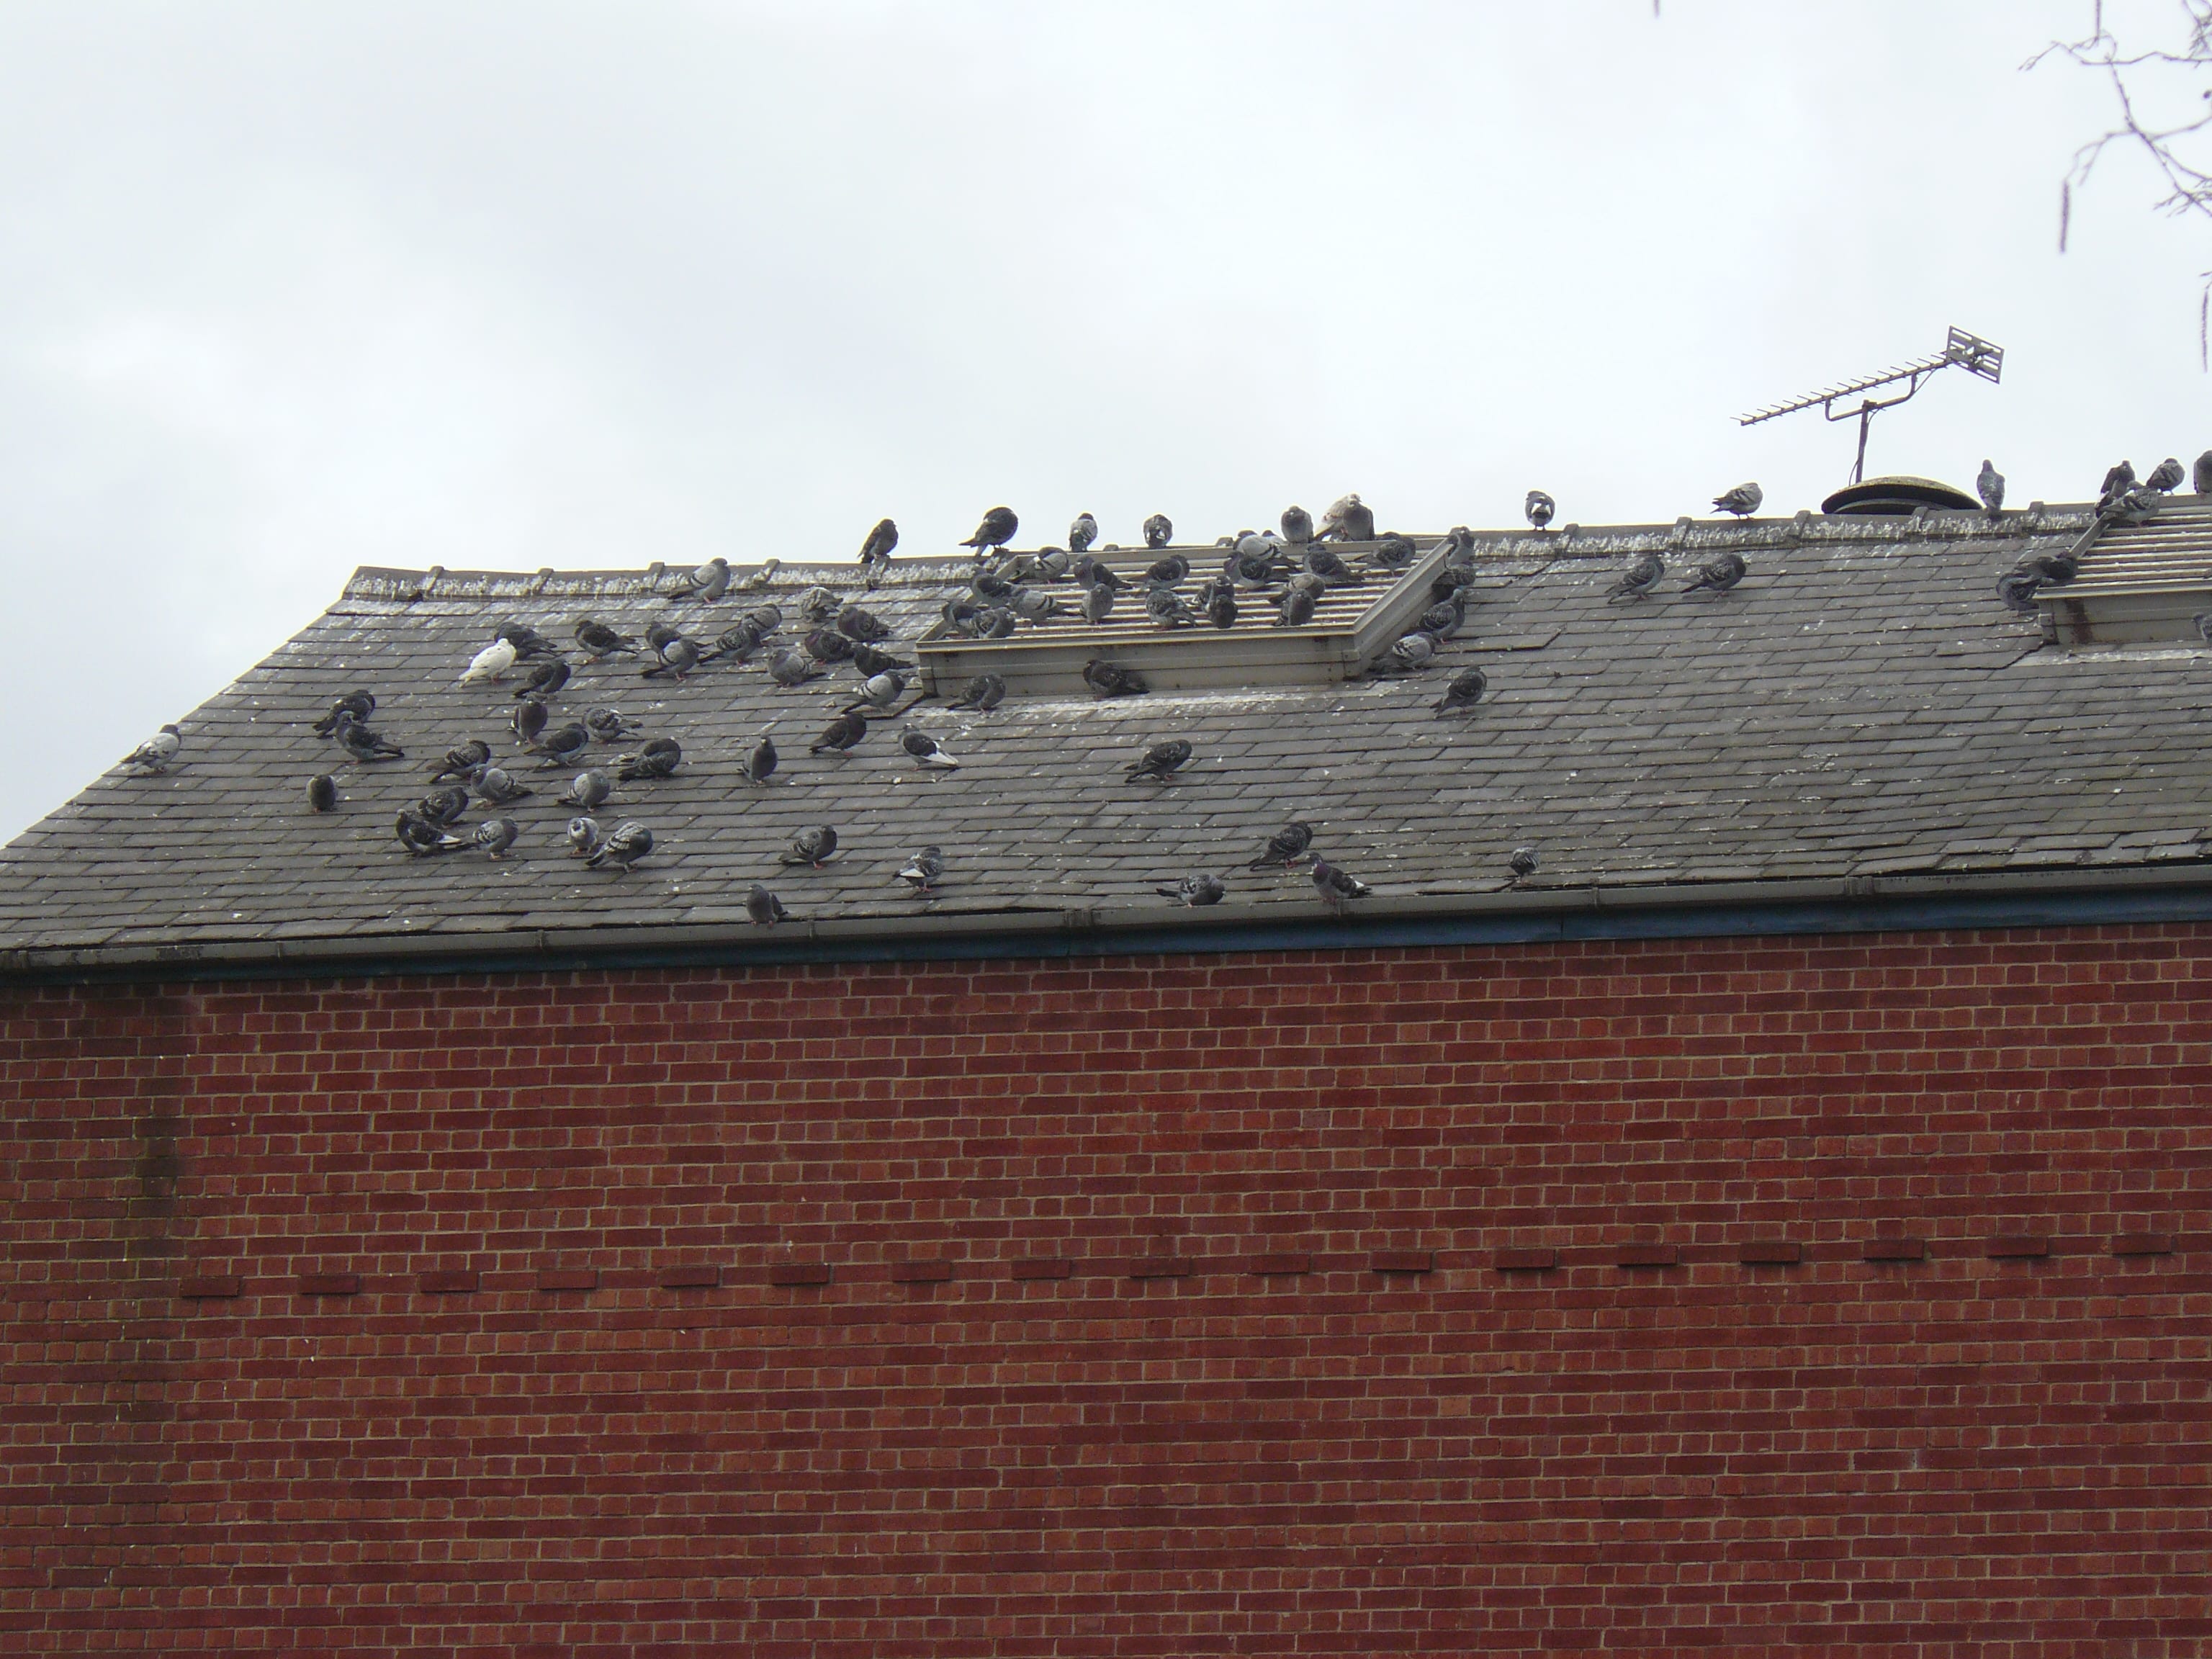 Pigeons on the roof, alas.